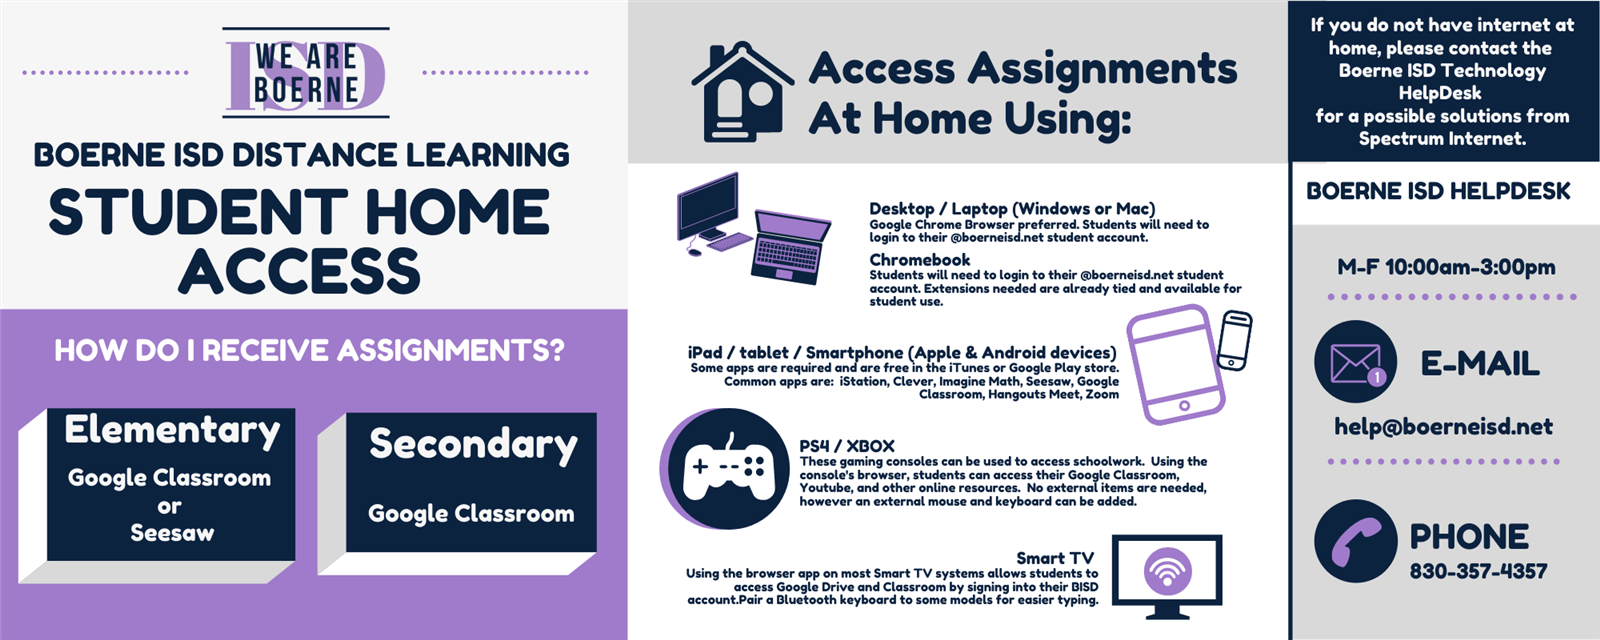 Student Home Access 